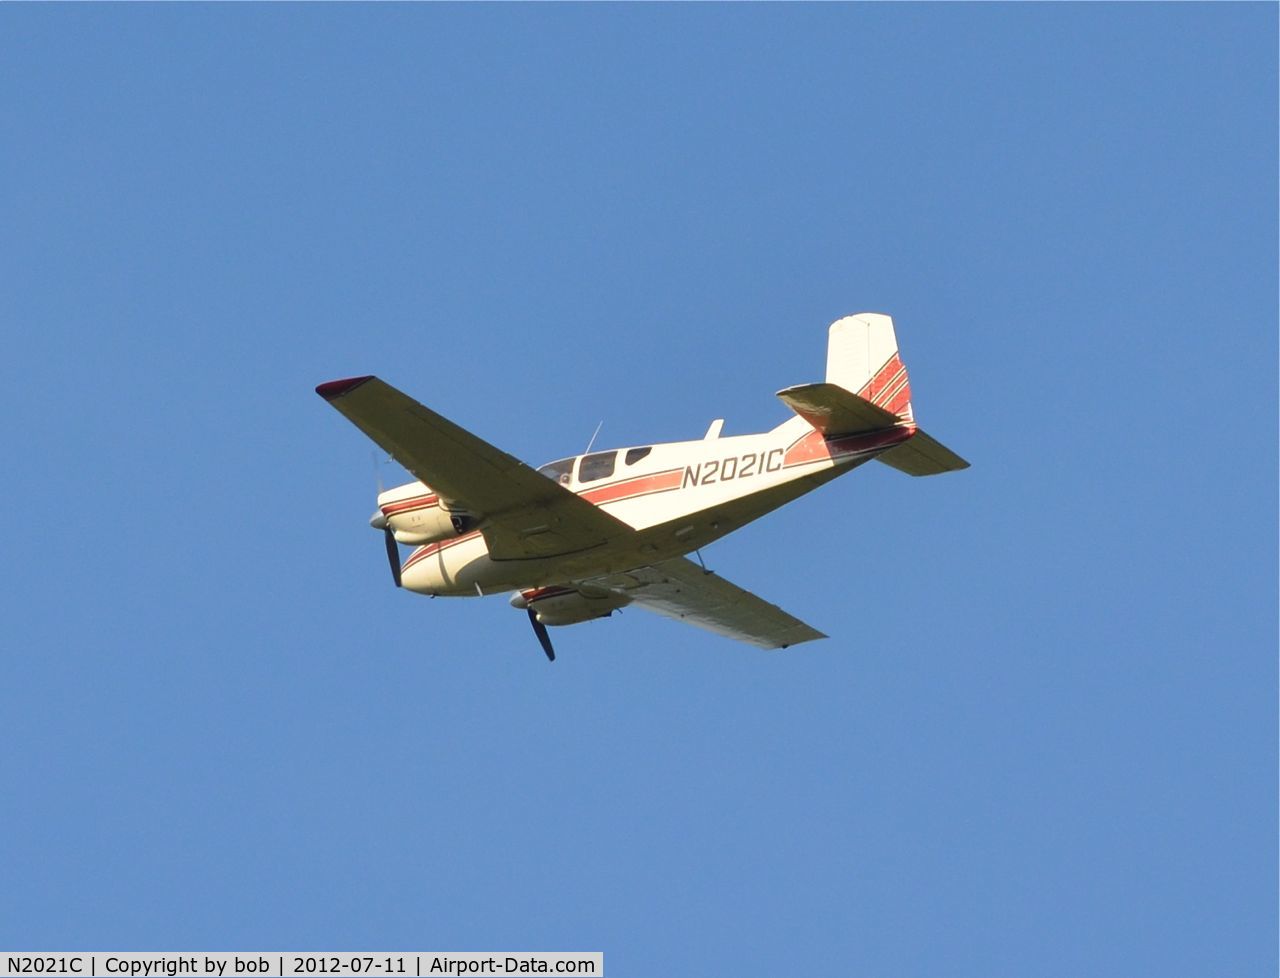 N2021C, 1959 Beech 95 Travel Air C/N TD-212, Flew over my home in Swanton, Vermont on July 11, 2012 around 6:15pm.